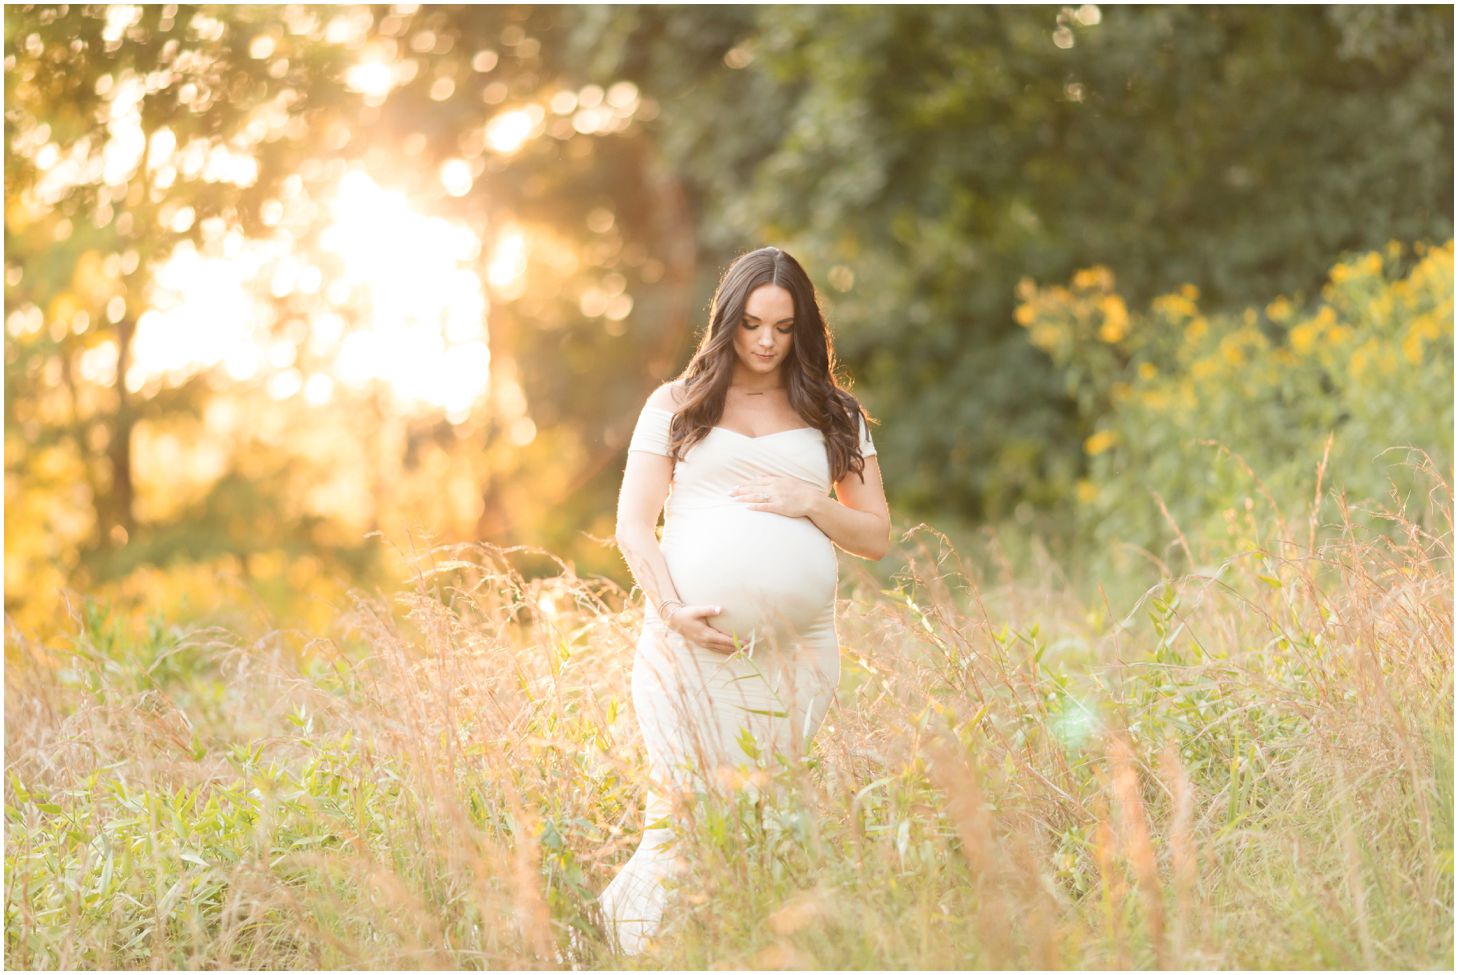 Woman in grassy field at sunset for maternity pictures at North Park in Pittsburgh